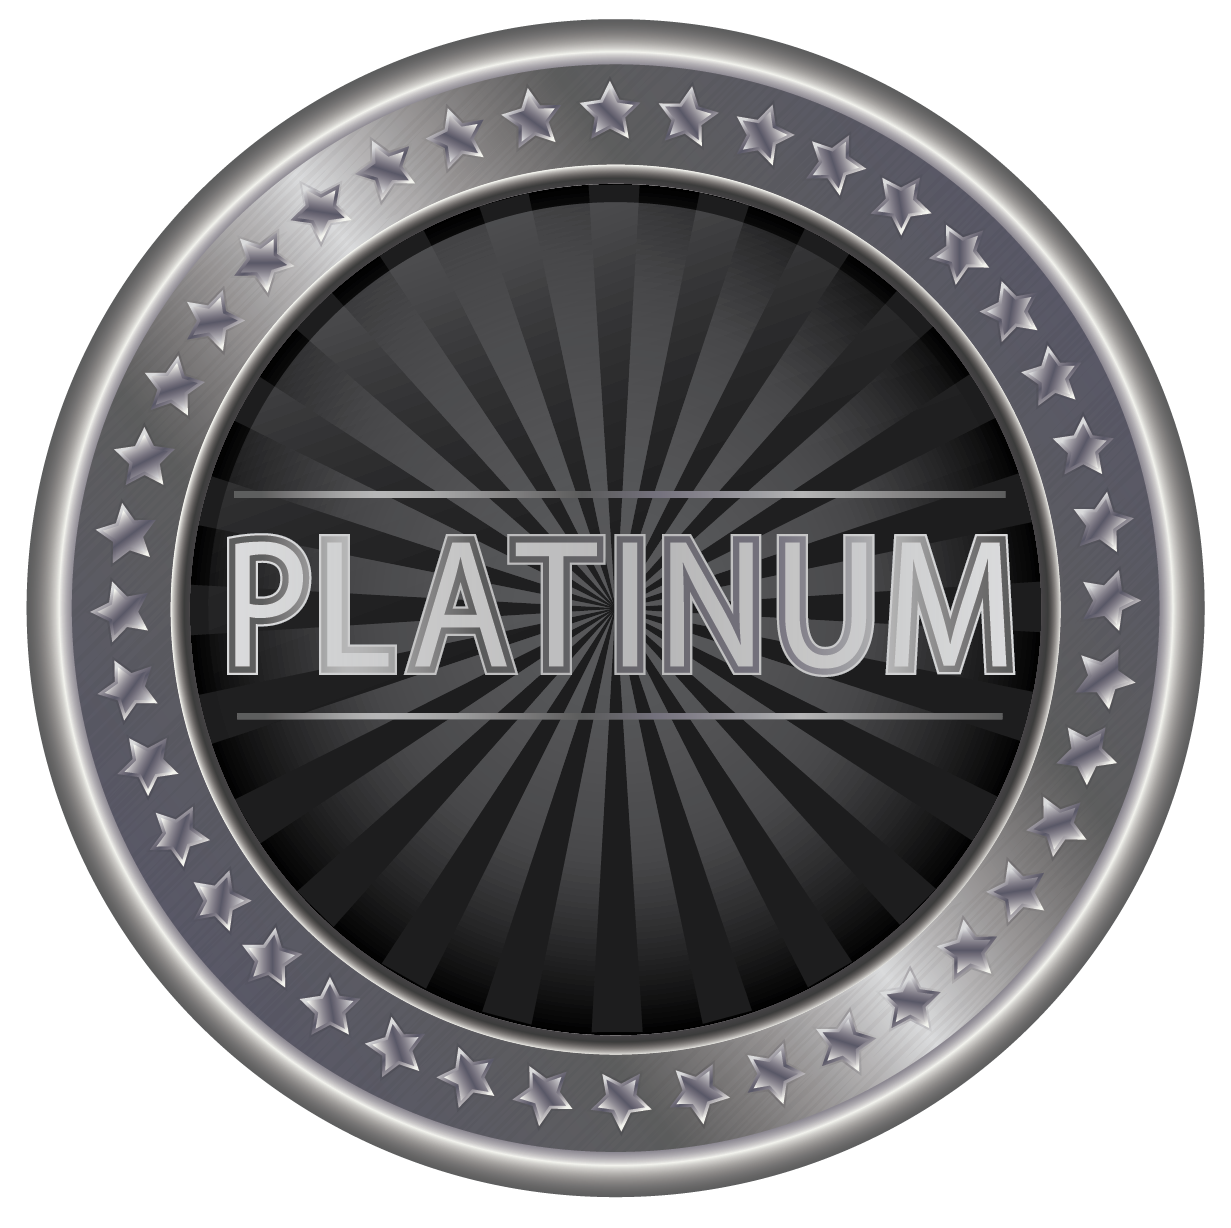 Platinum Sponsor ($1,000 and above) - 8 Race Entries